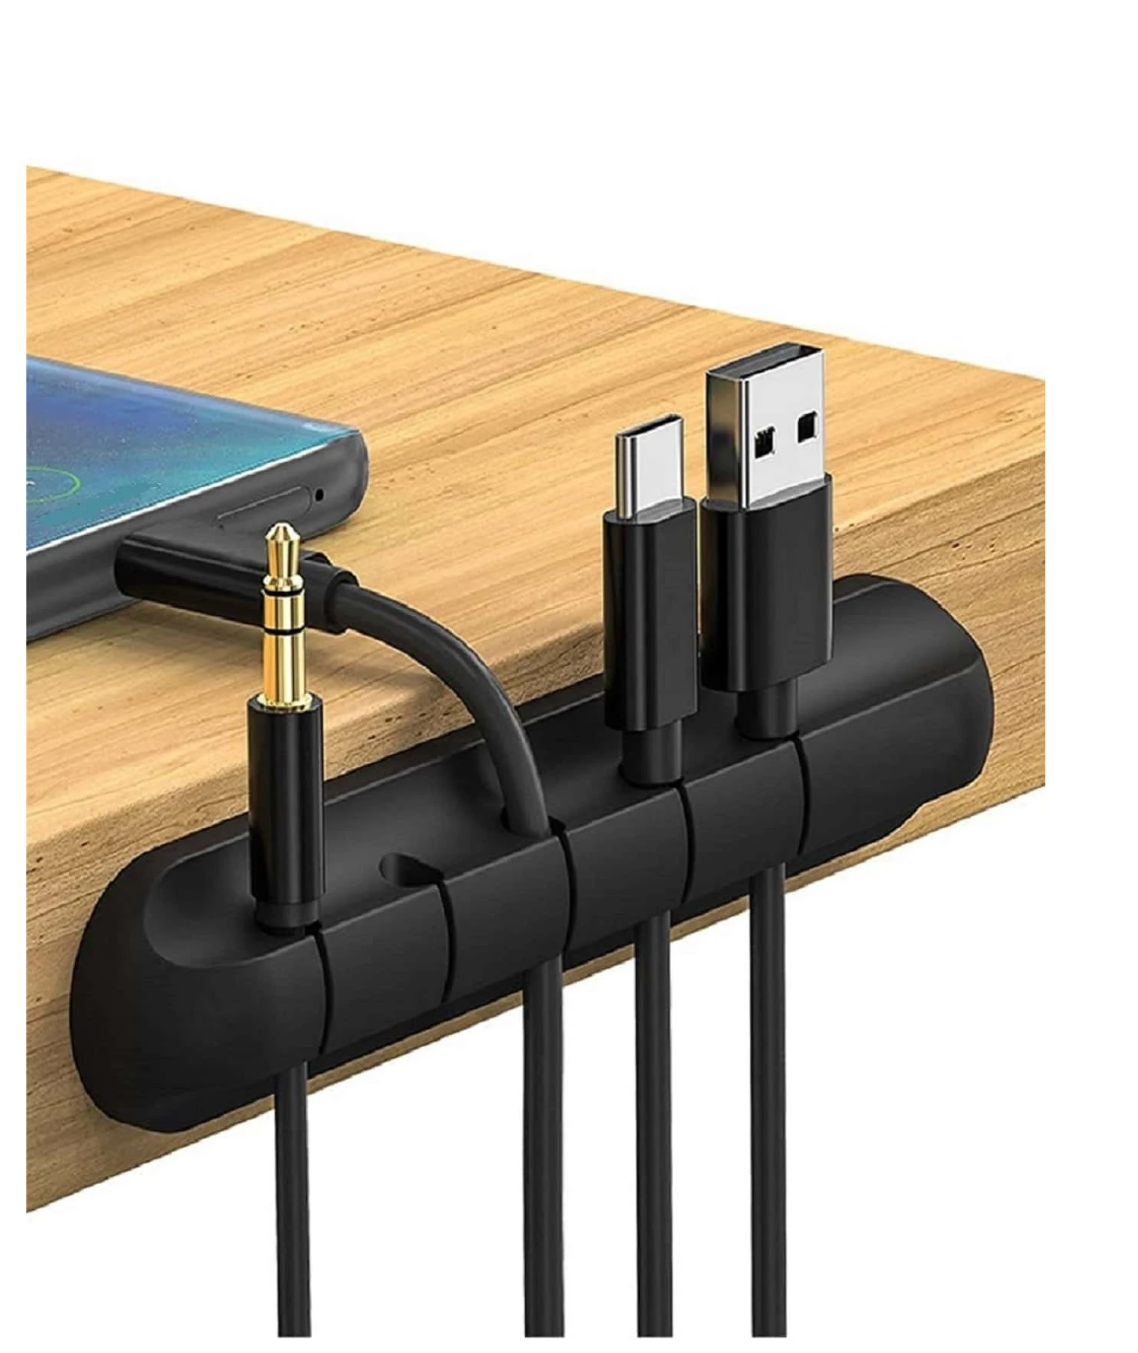 Desk Delight: Universal Desktop Data Cable Fixing Clip for a Tangle-Free Tech Haven!